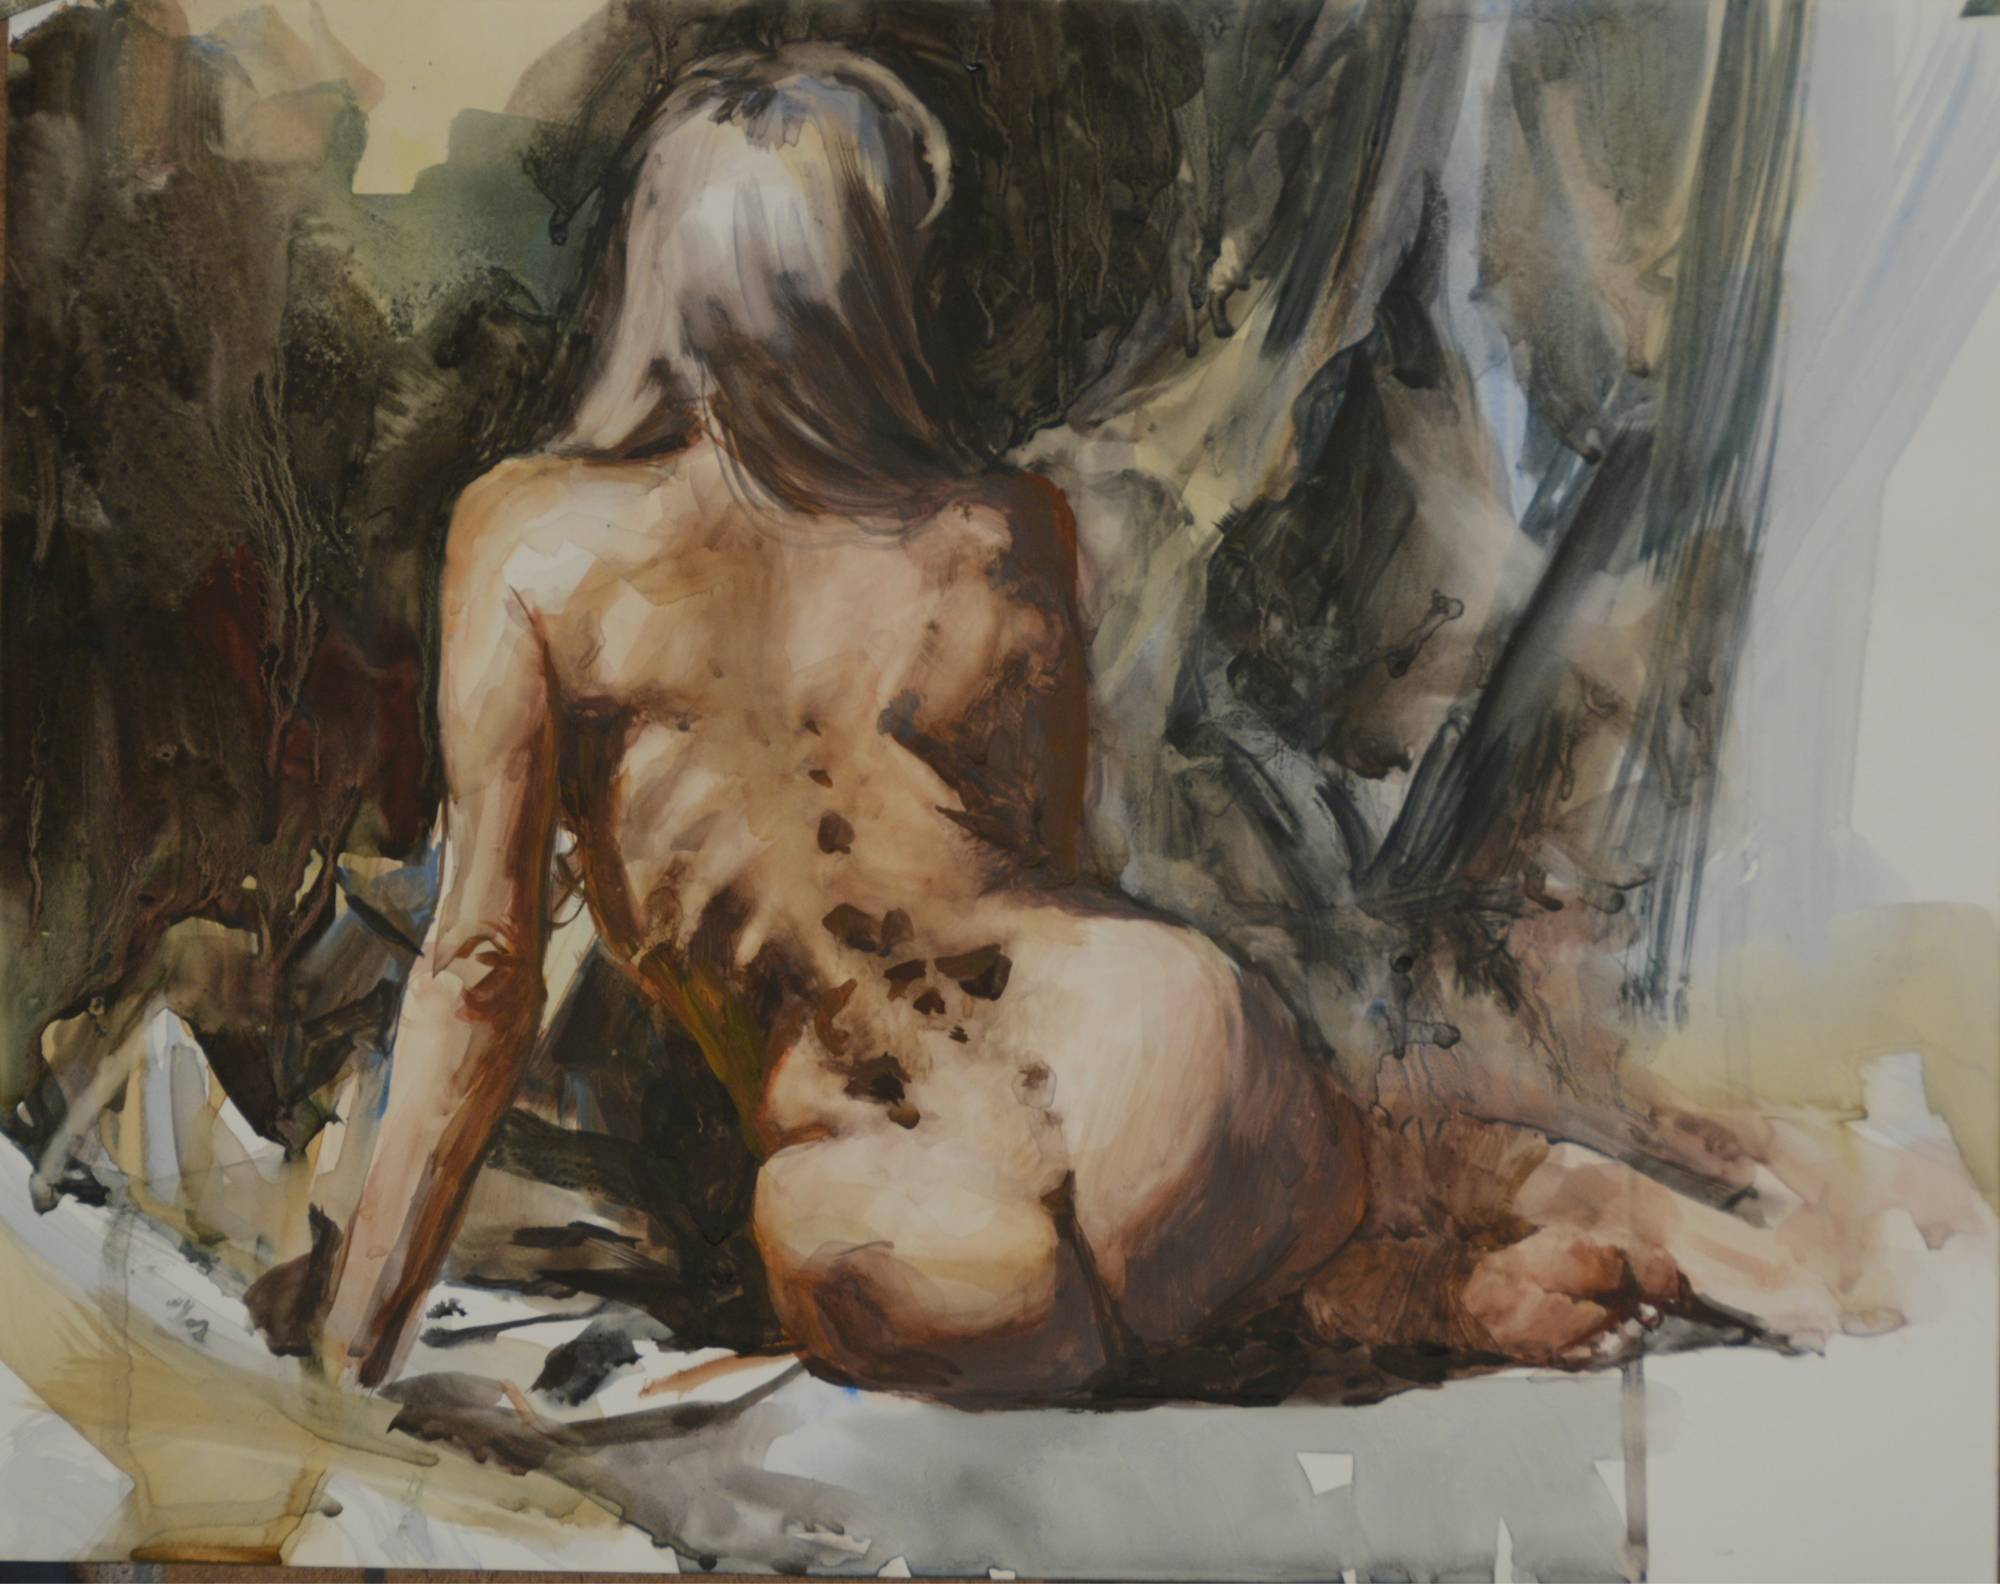 watercolor painting in which the model faces away from us looking back into a dark abstract background